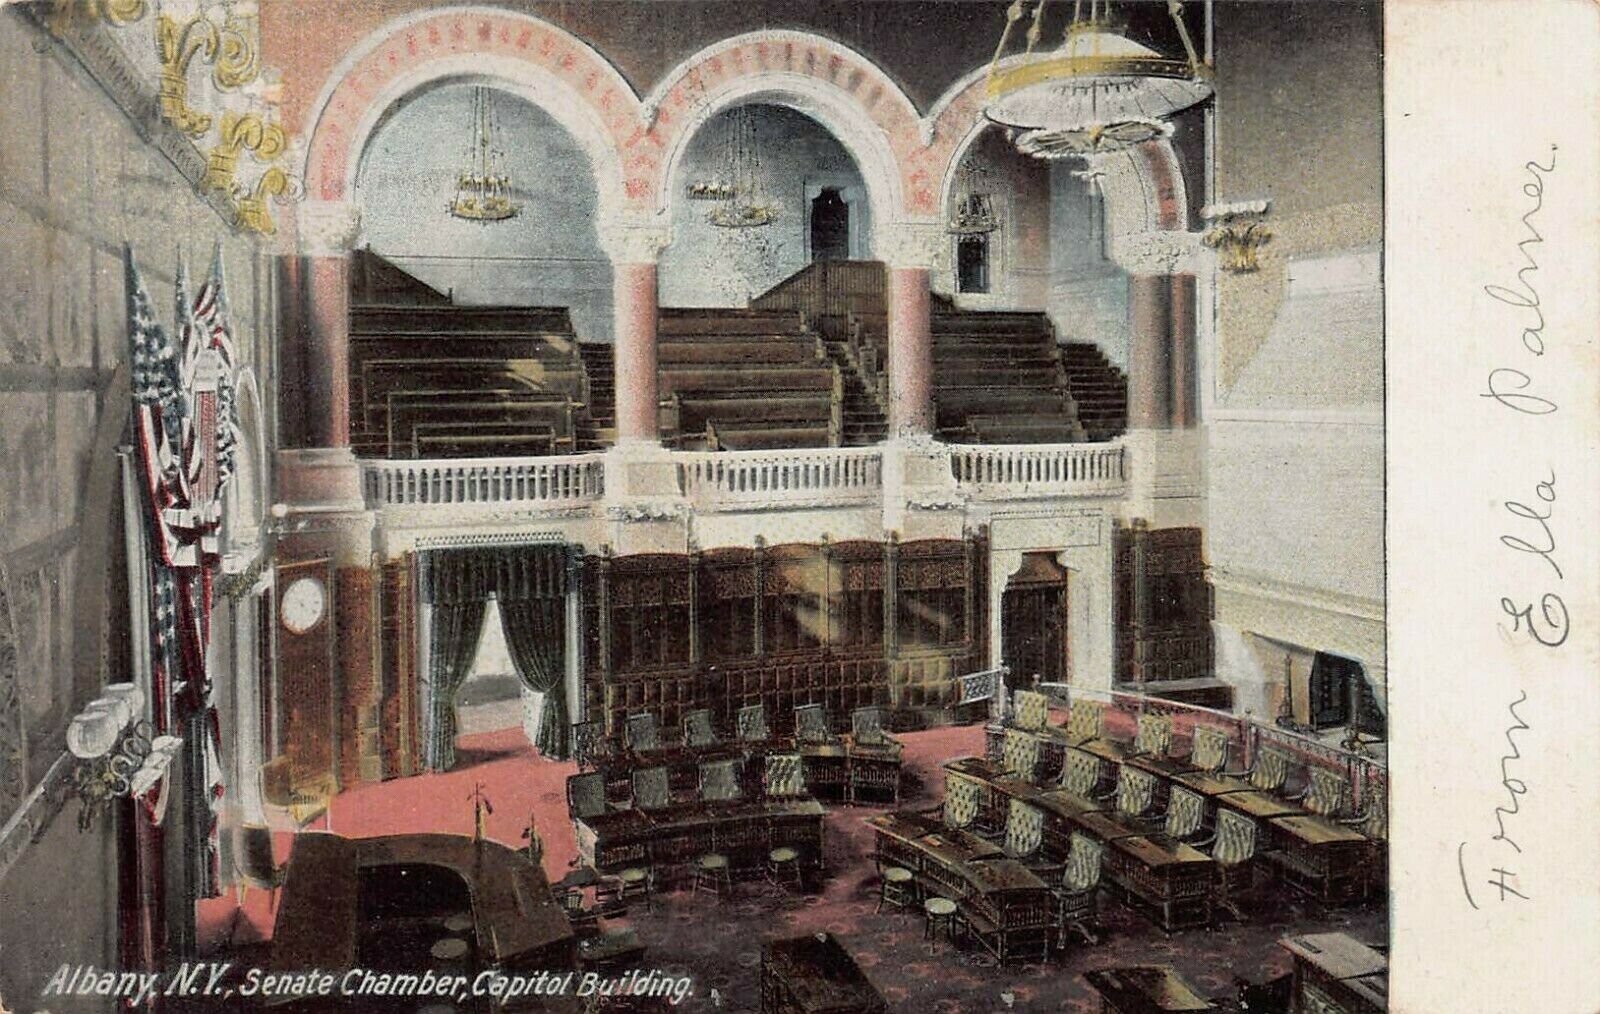 Senate Chamber, Capitol Building, Albany, N.Y., Very Early Postcard, Used 